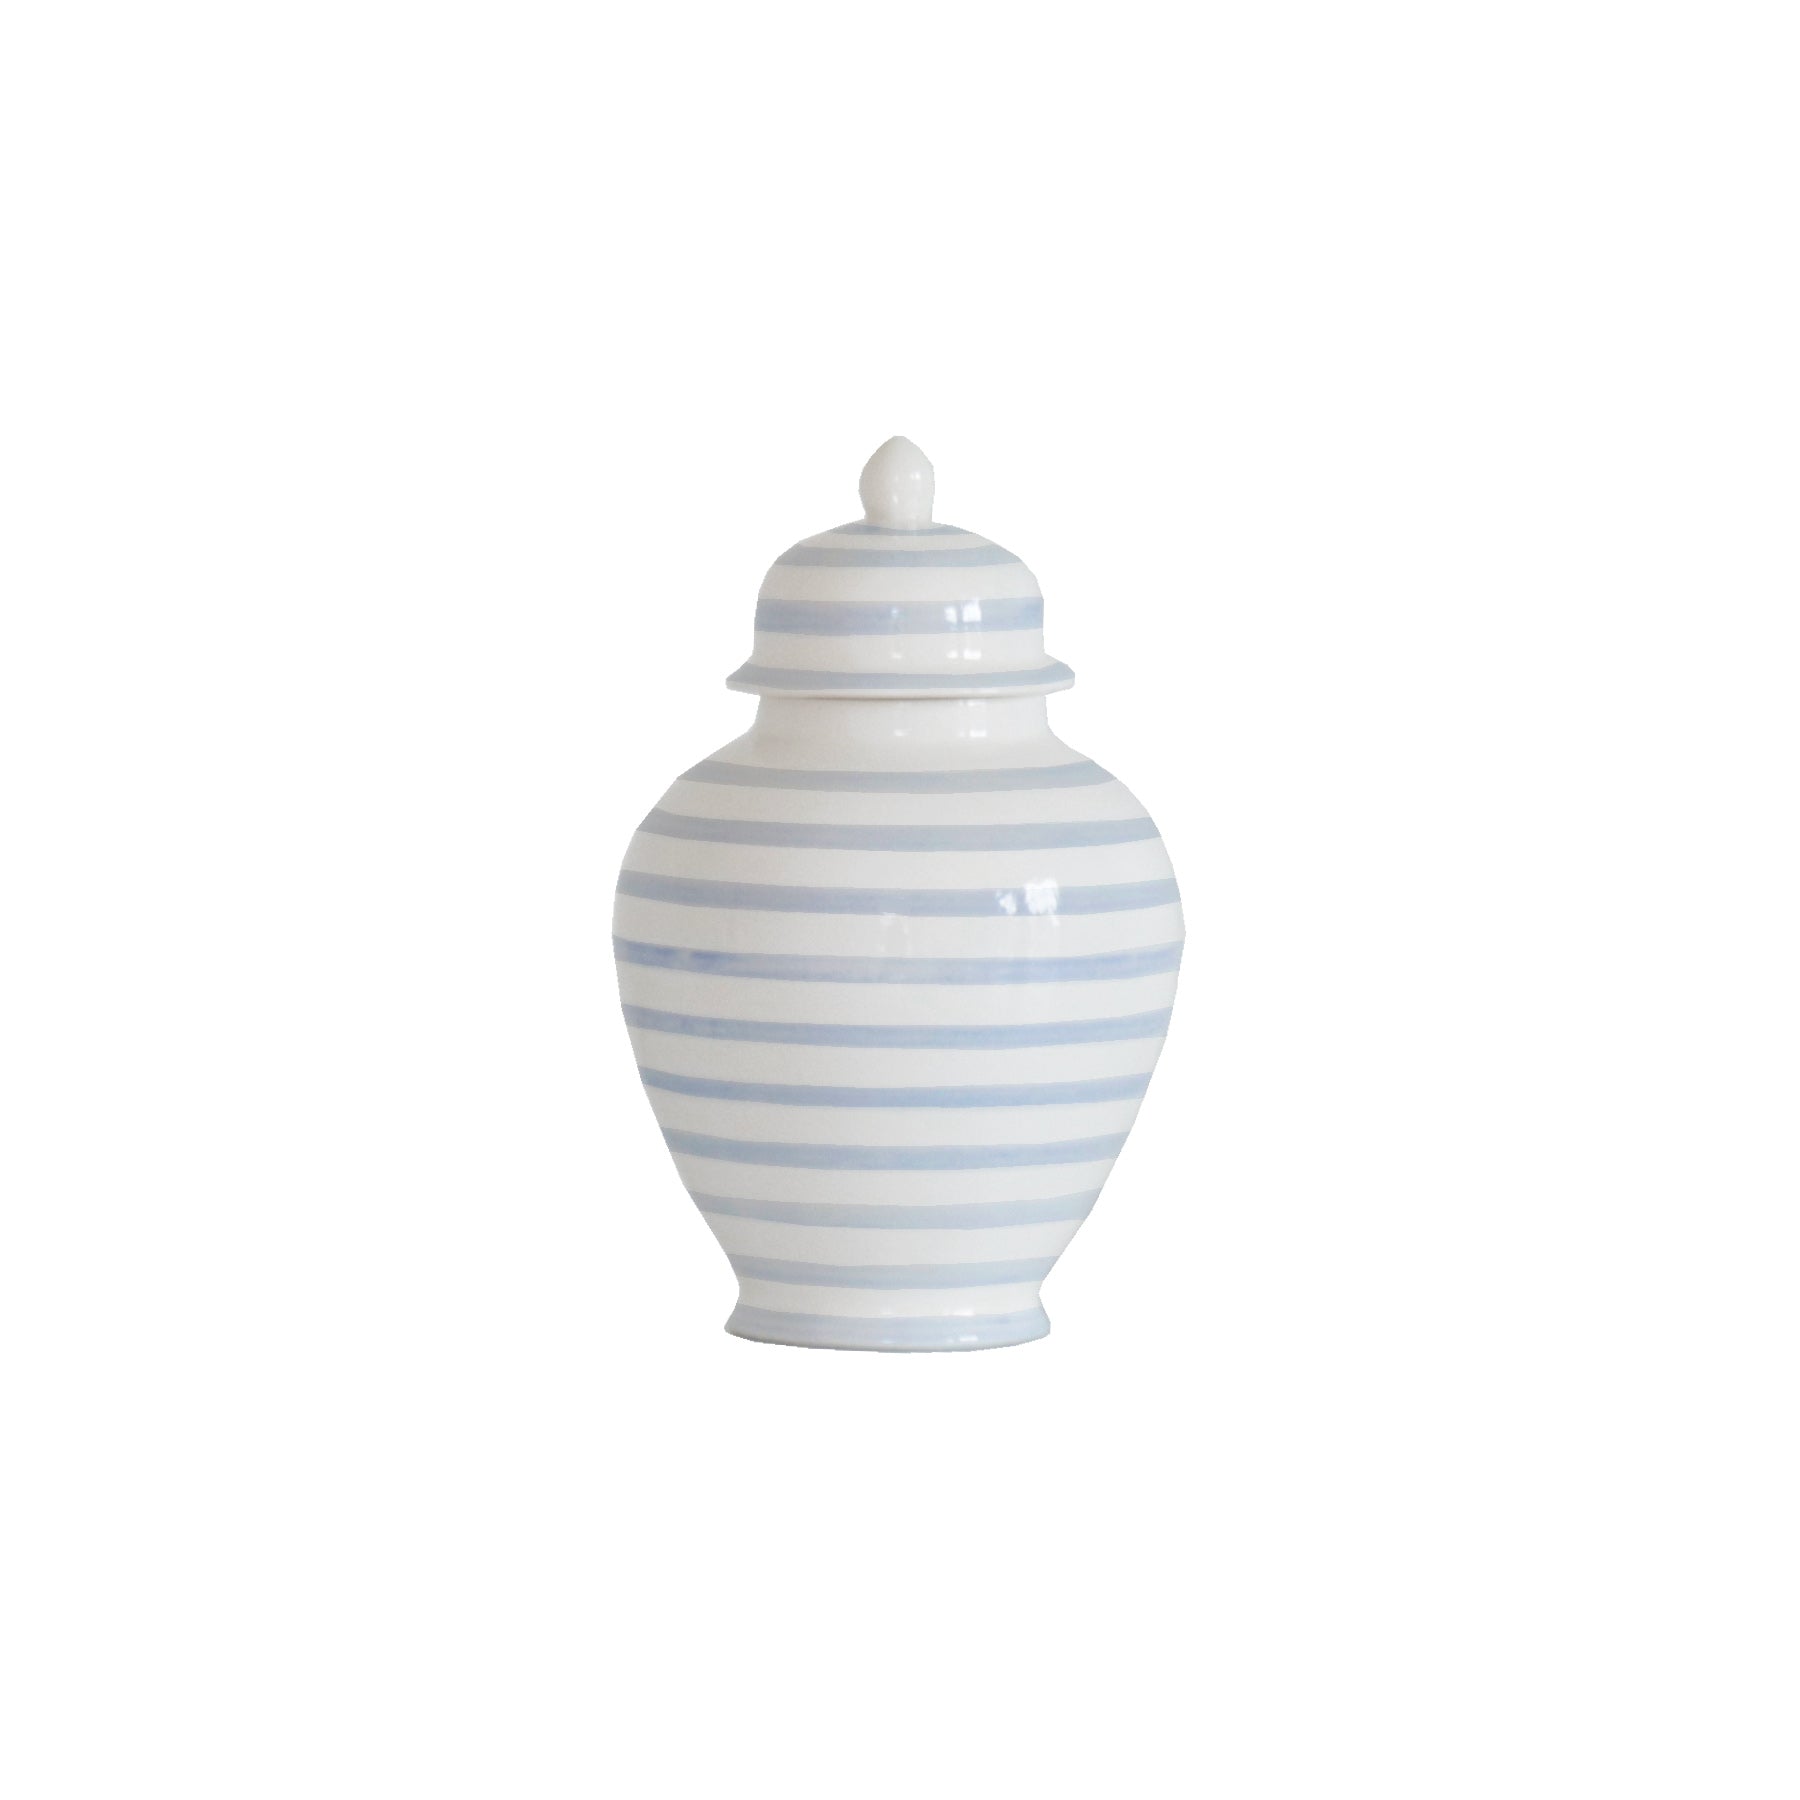 Painterly Striped Ginger Jars in Blue for Lo Home x Lemon Stripes